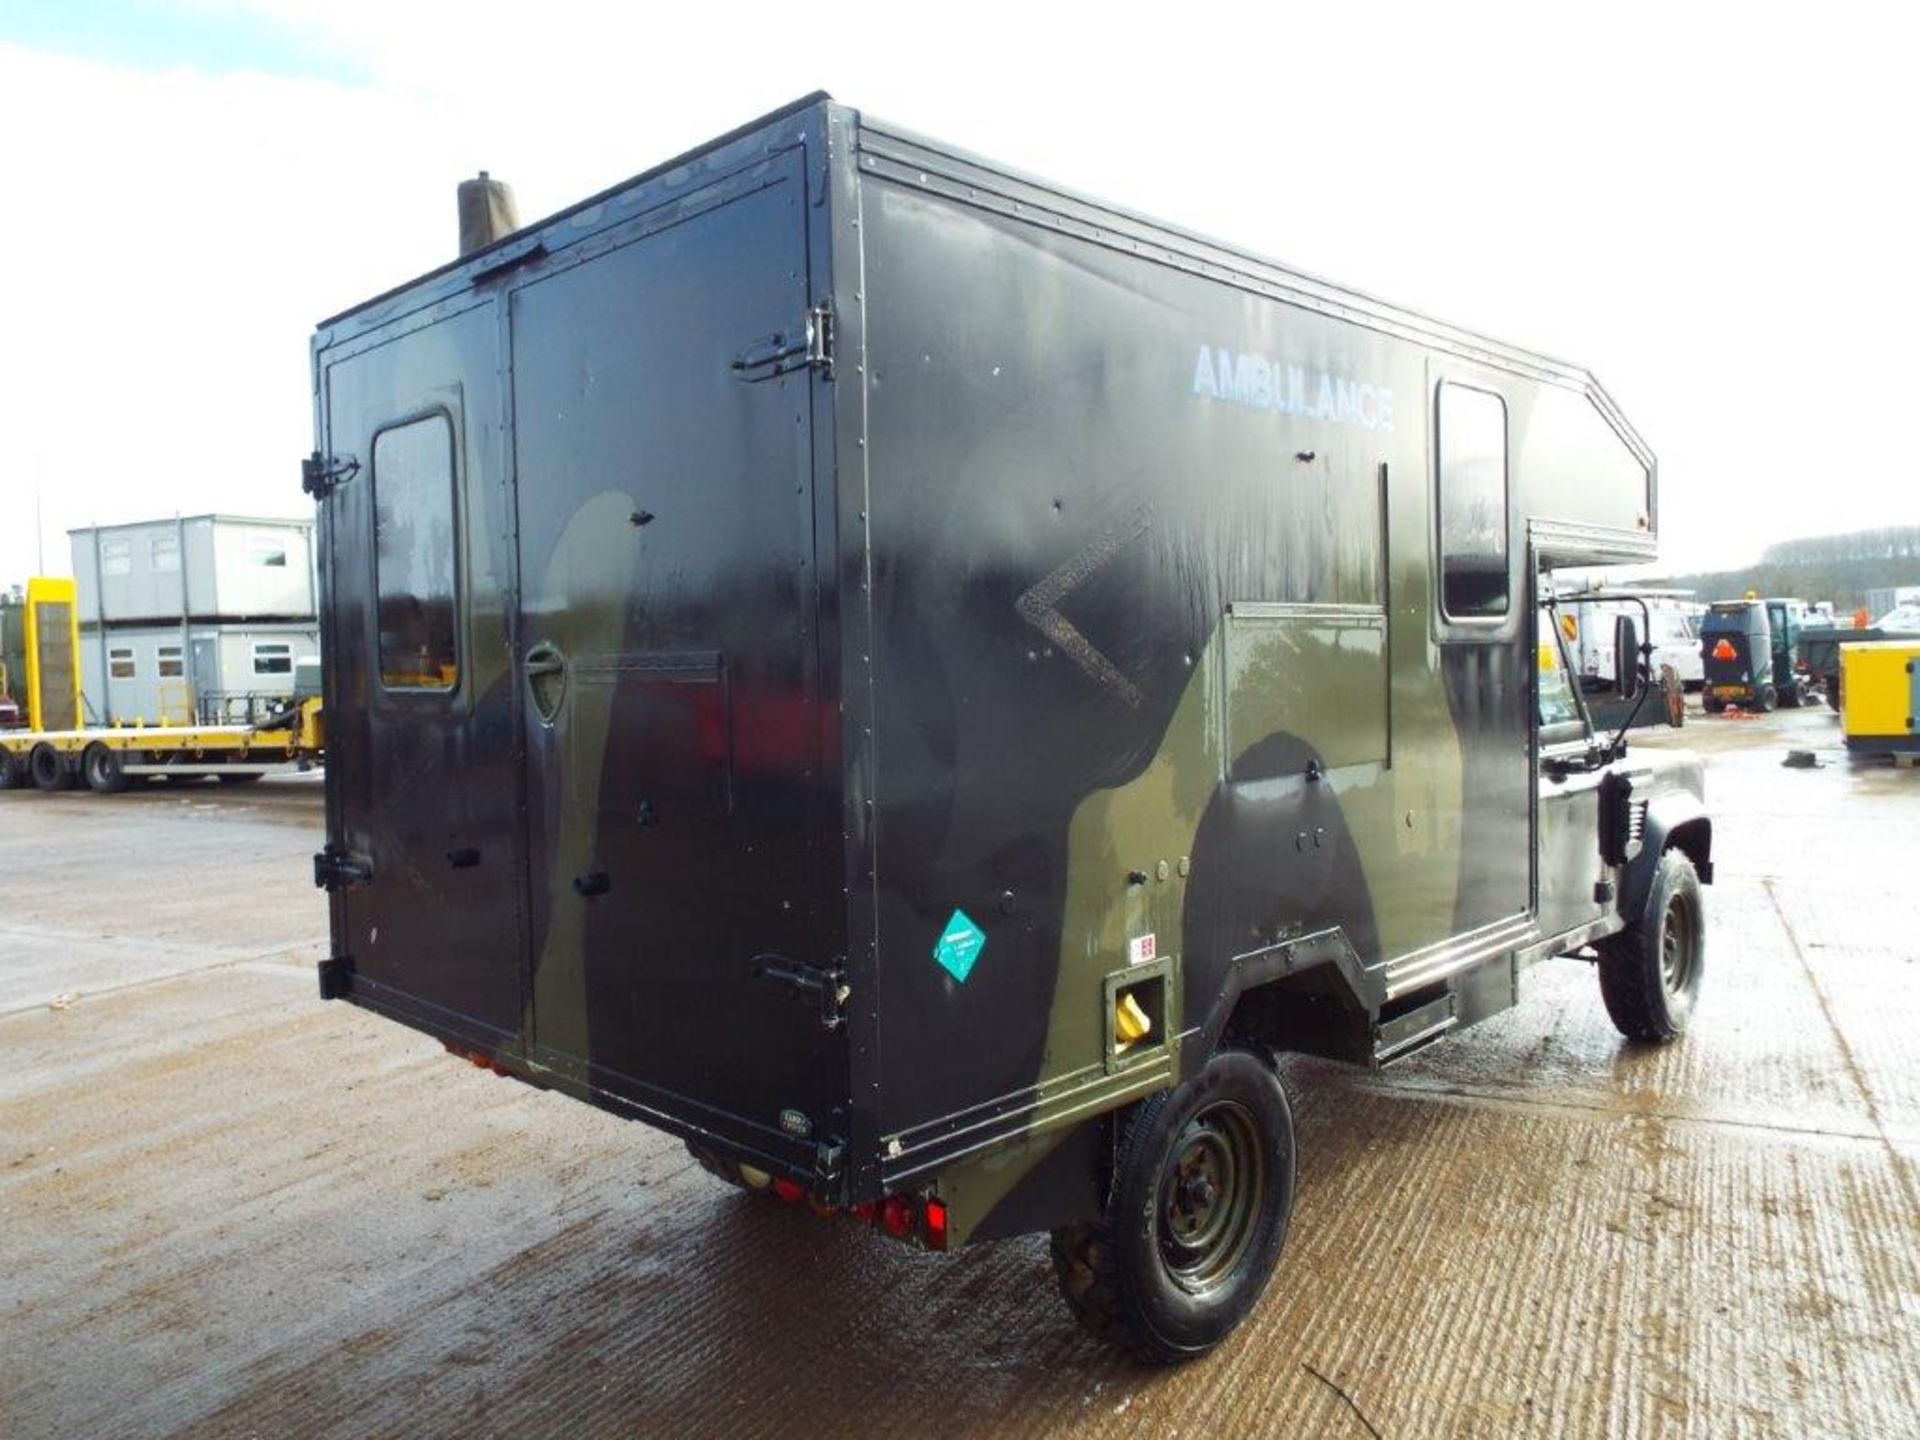 Military Specification LHD Land Rover Wolf 130 ambulance - Image 7 of 23